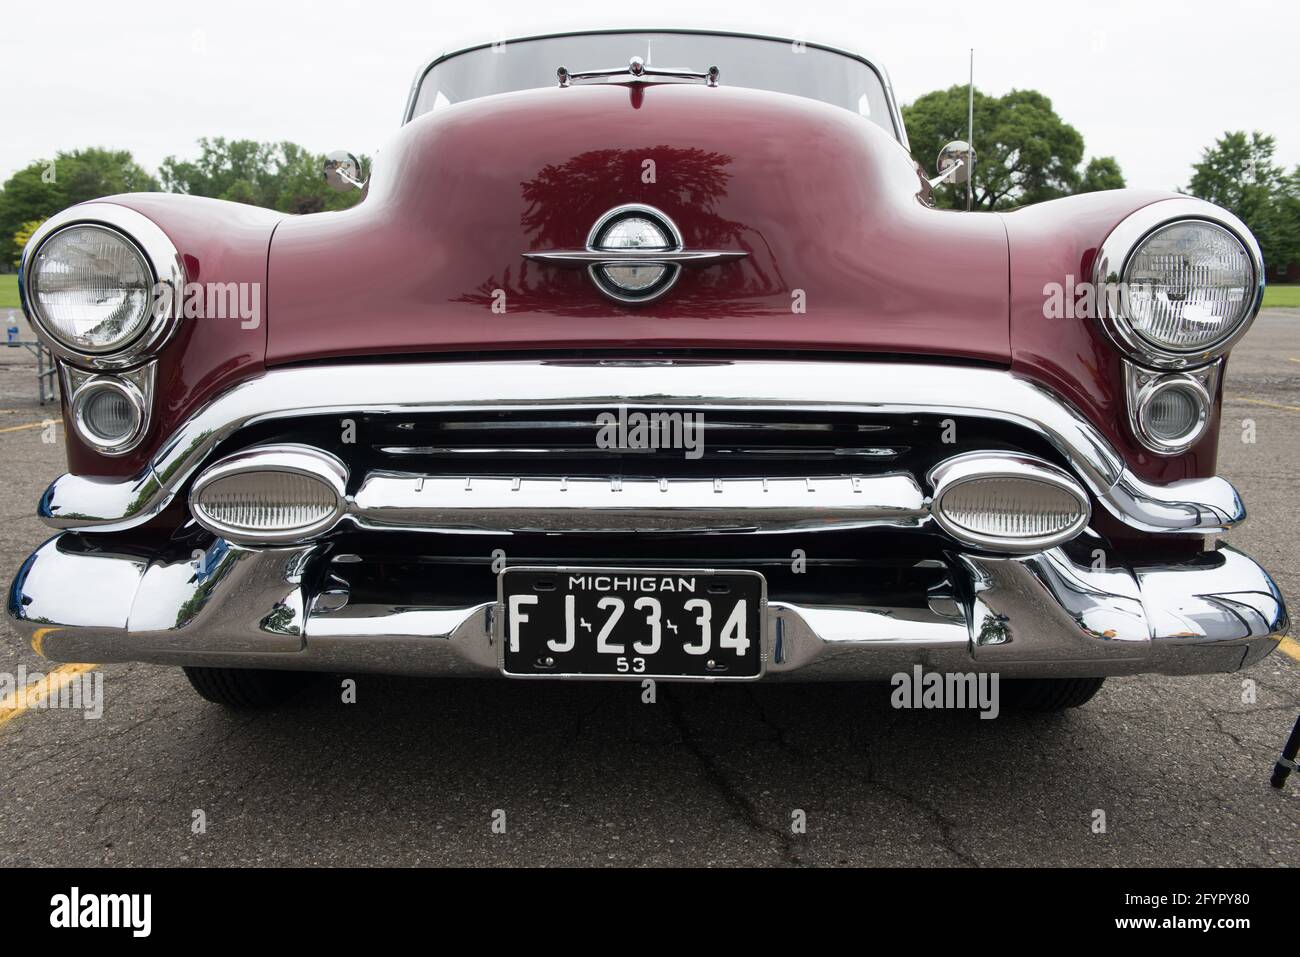 A Classic 1953 Oldsmobile Eighty-Eight Stock Photo